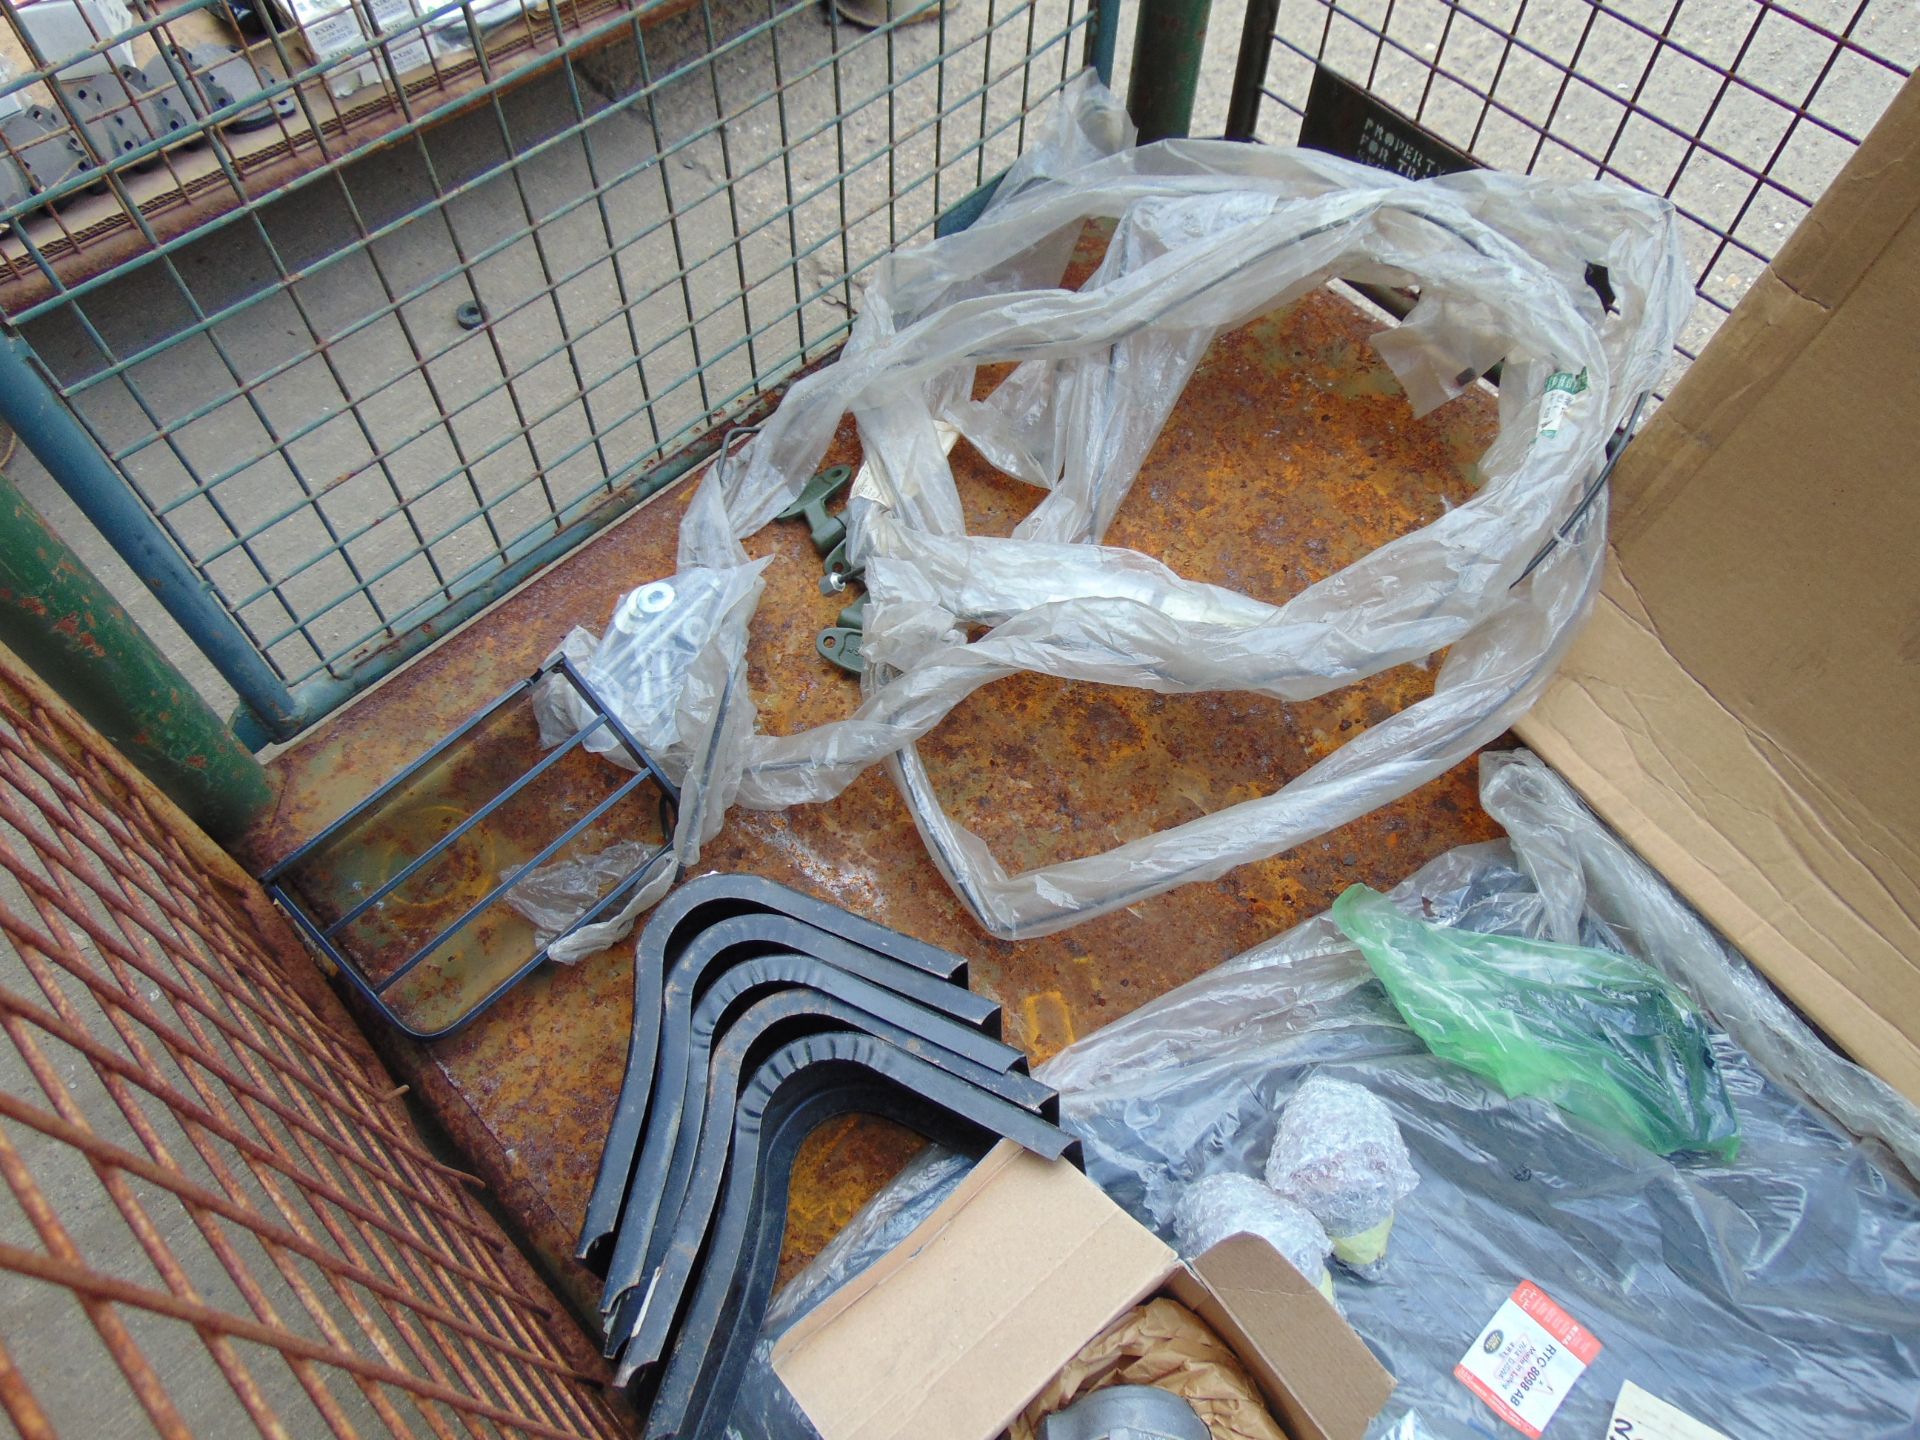 1 x Stillage of New Unissued Land Rover Spares as Shown - Image 8 of 8